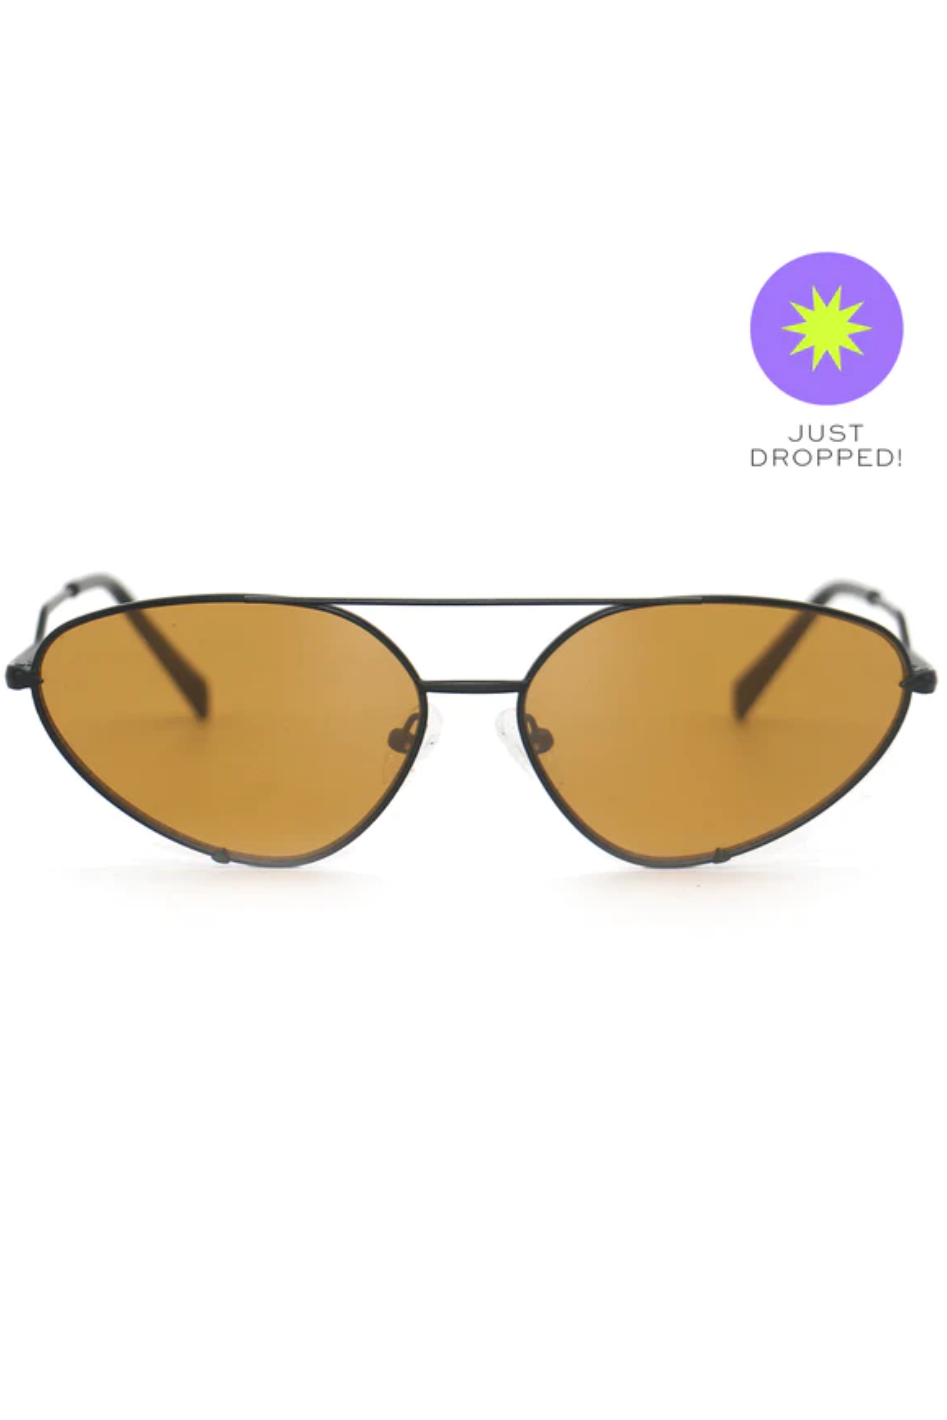 Lucky Star Vintage Aviator - Yellow - Expressive Collective CO.